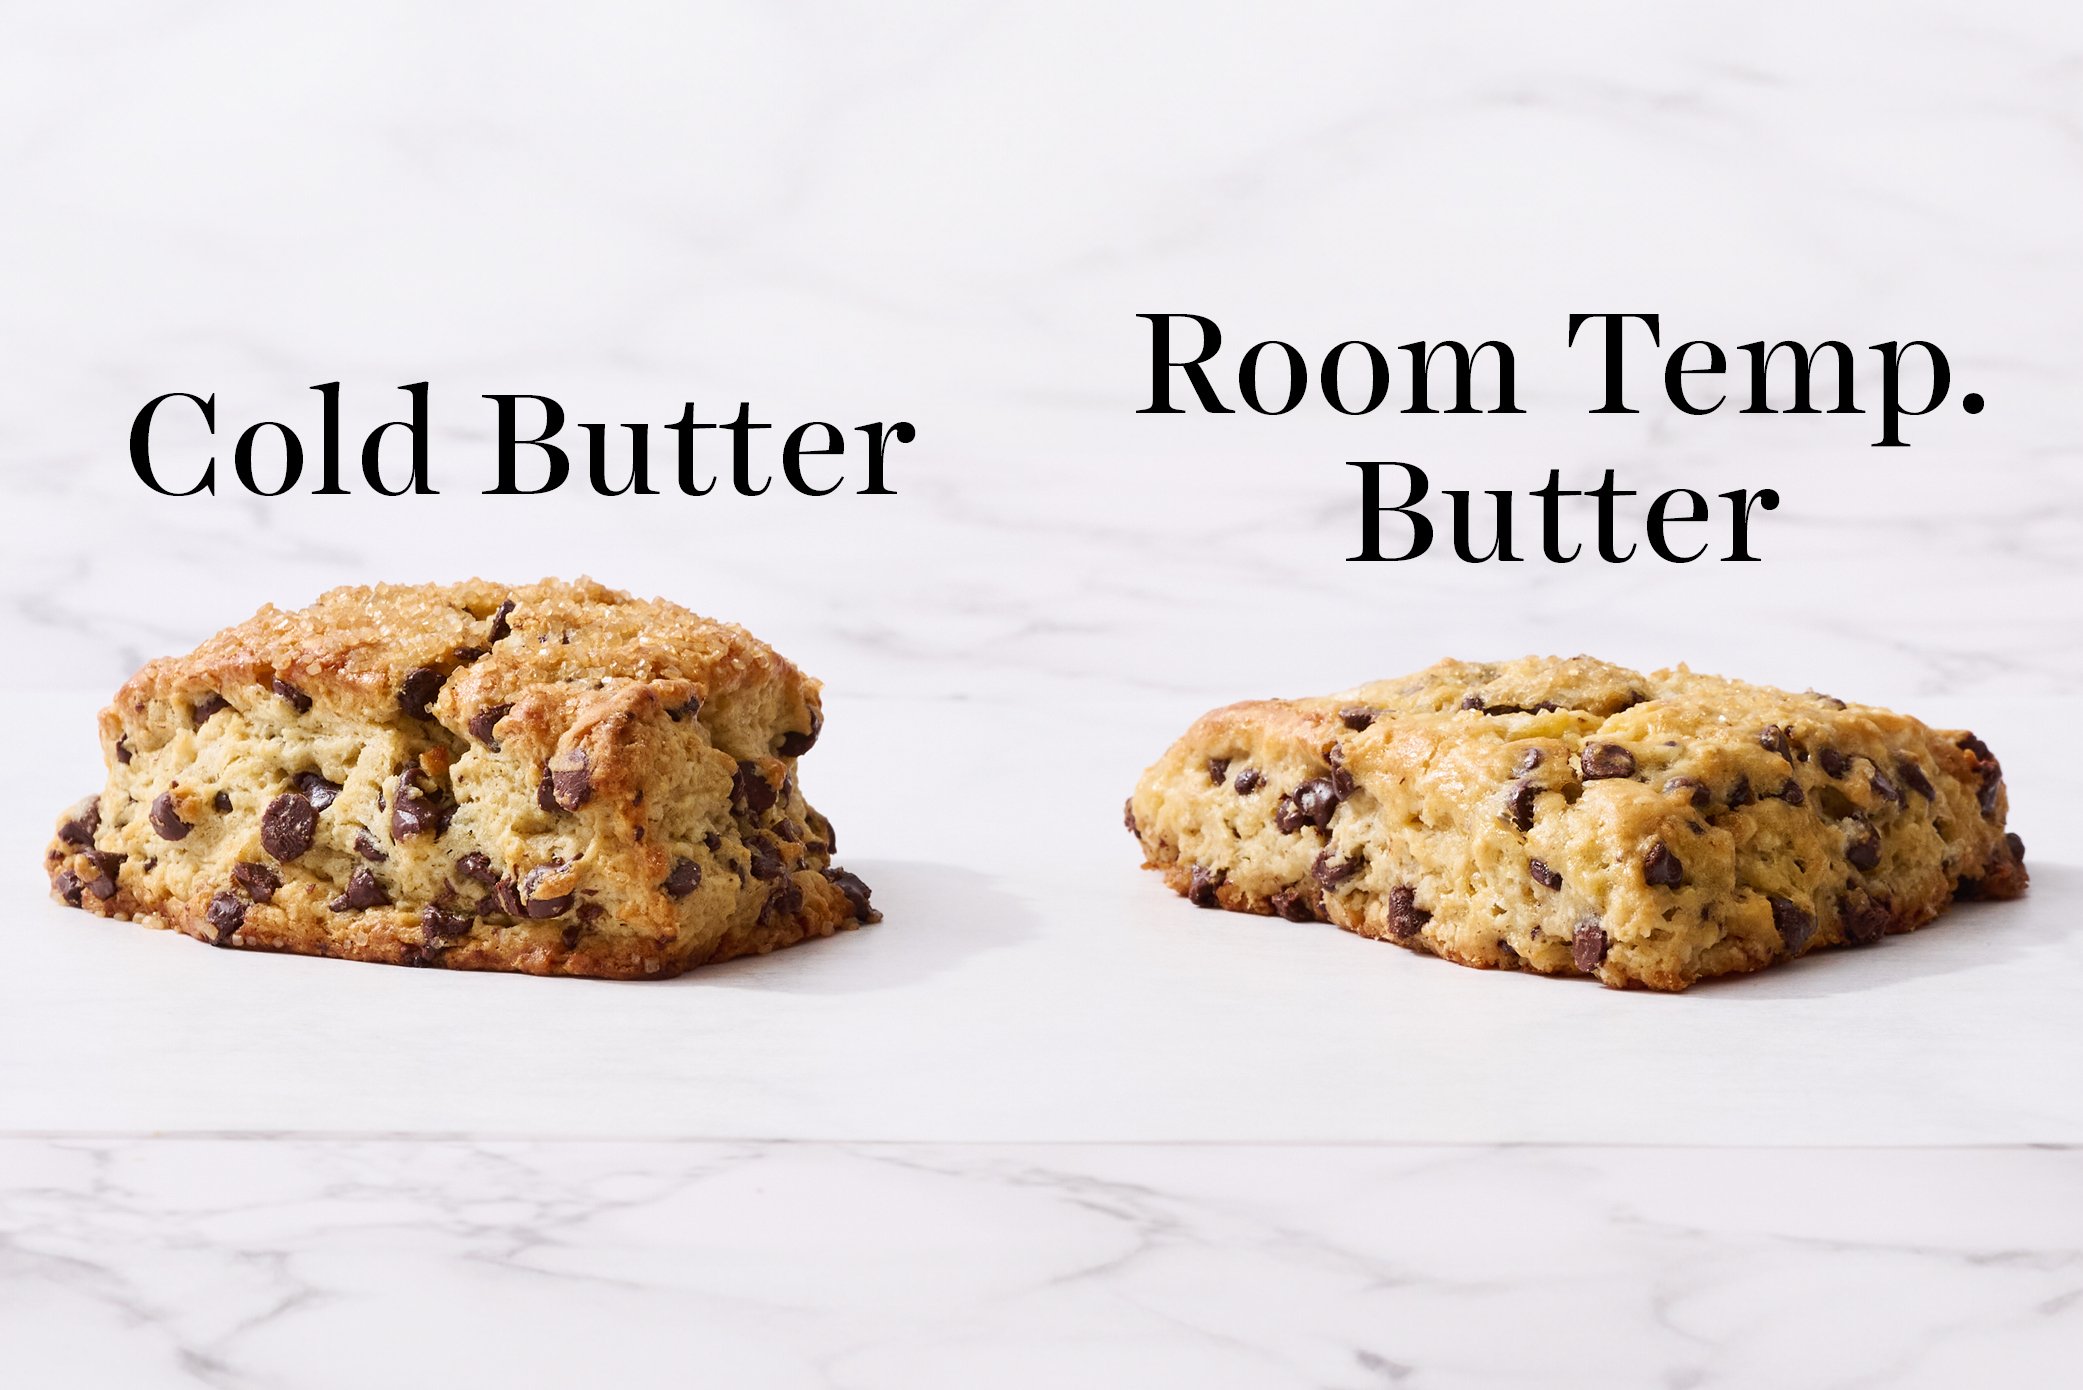 comparison of scone made with cold butter vs. room temperature butter